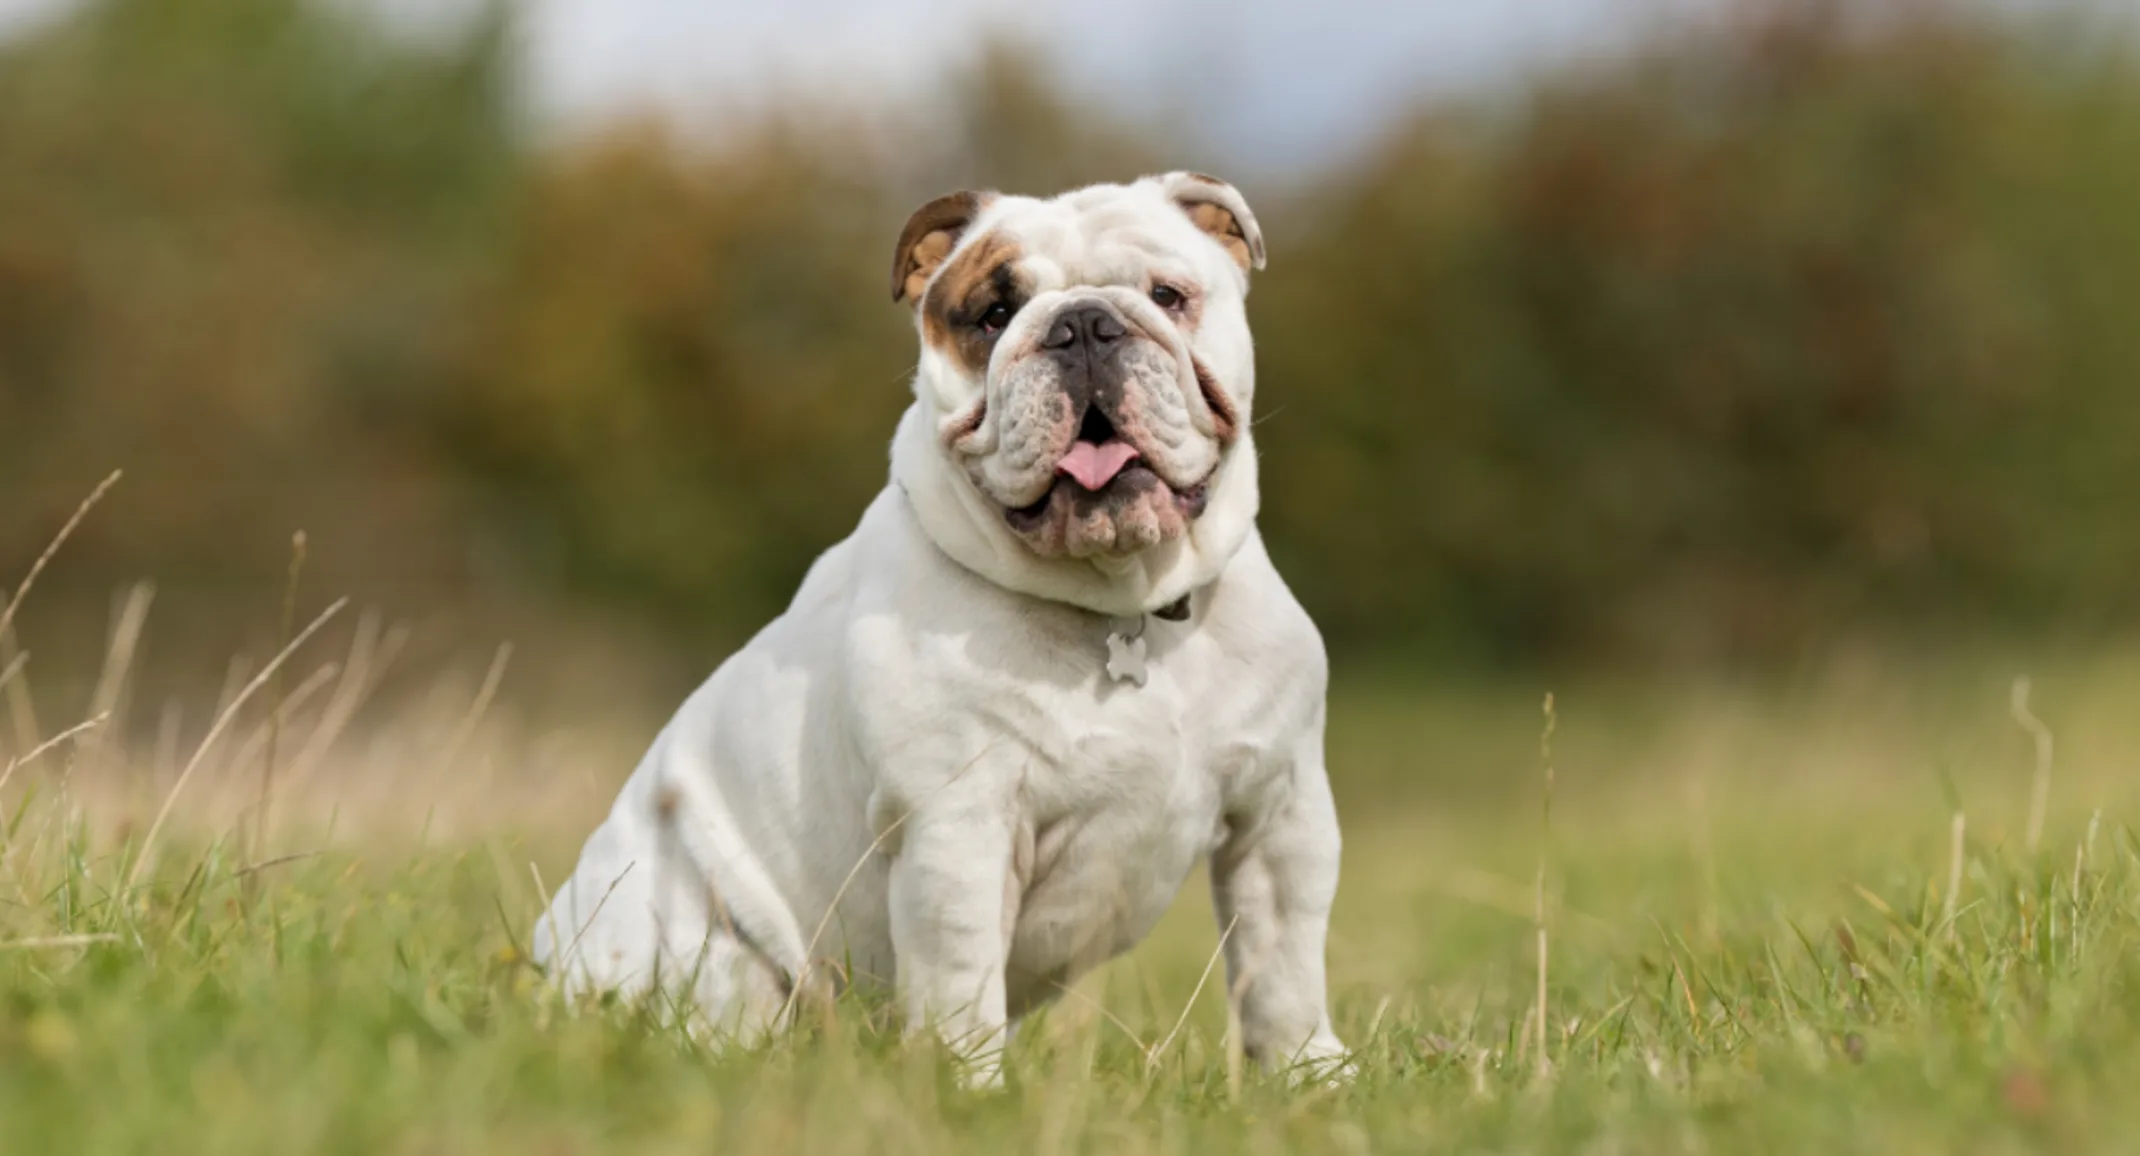 A white and brown Bulldog sitting in a grassy area